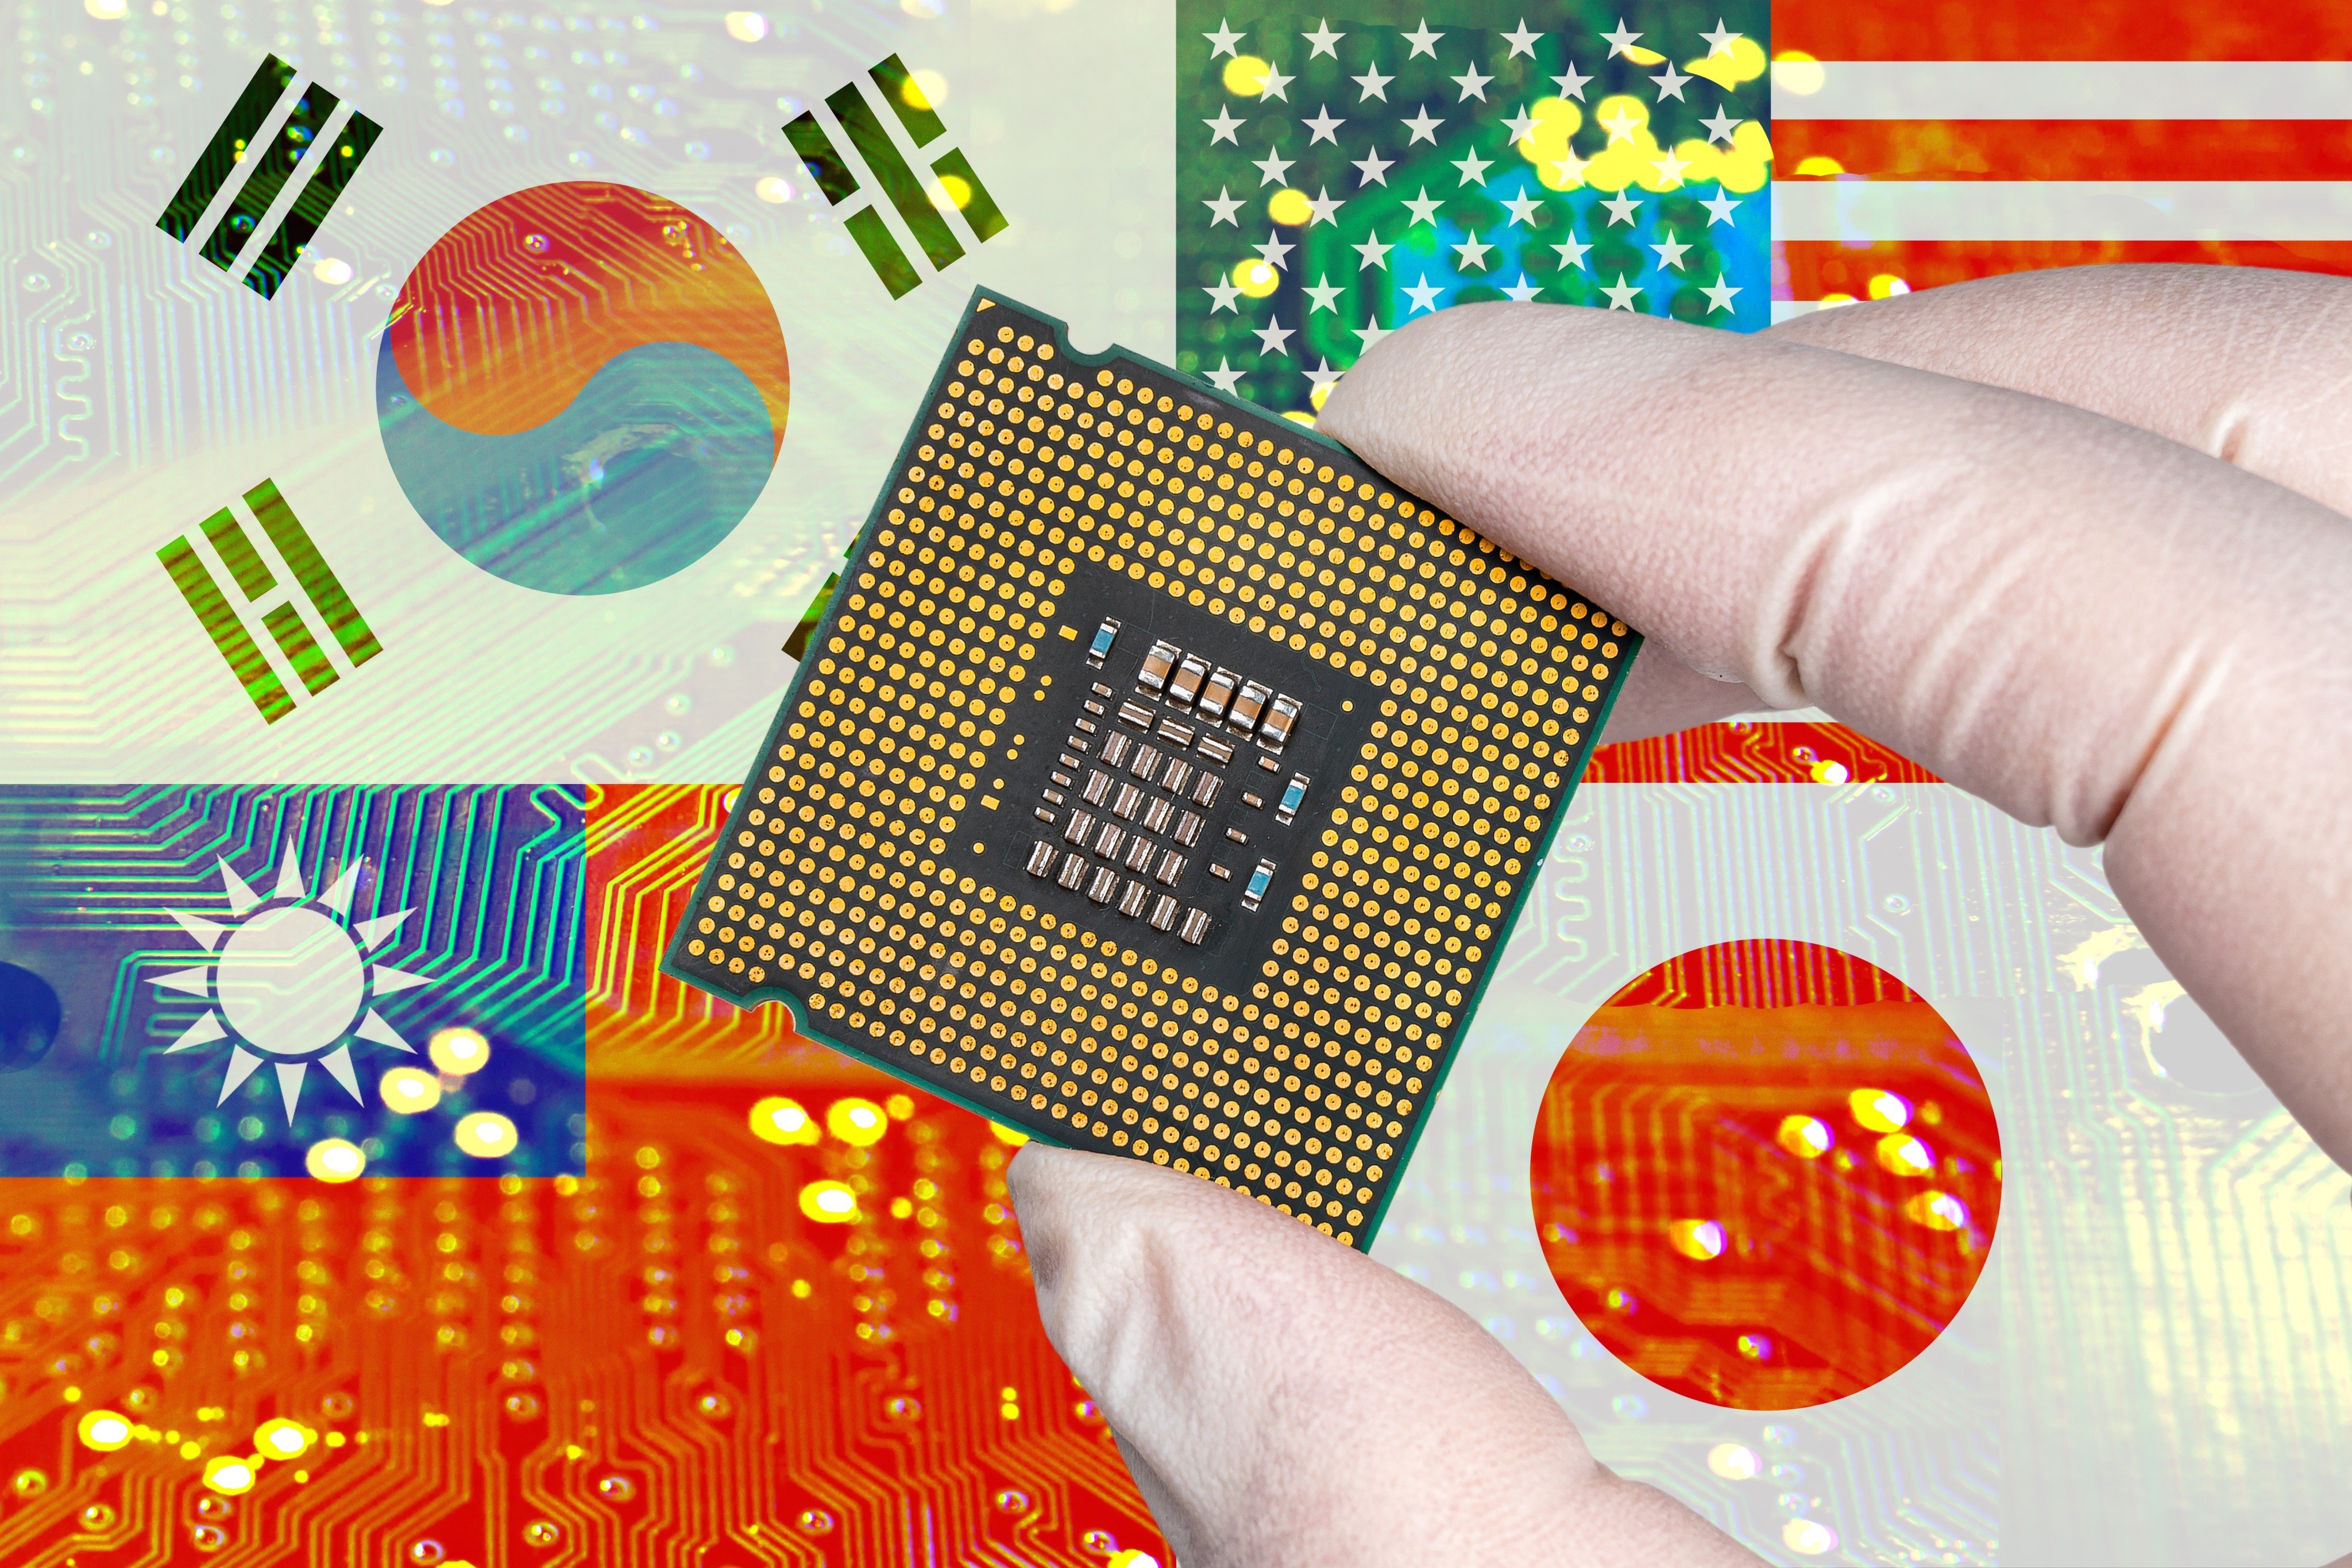 Taiwan supplies around 60 per cent of the world’s semiconductors. Photo: Shutterstock Images